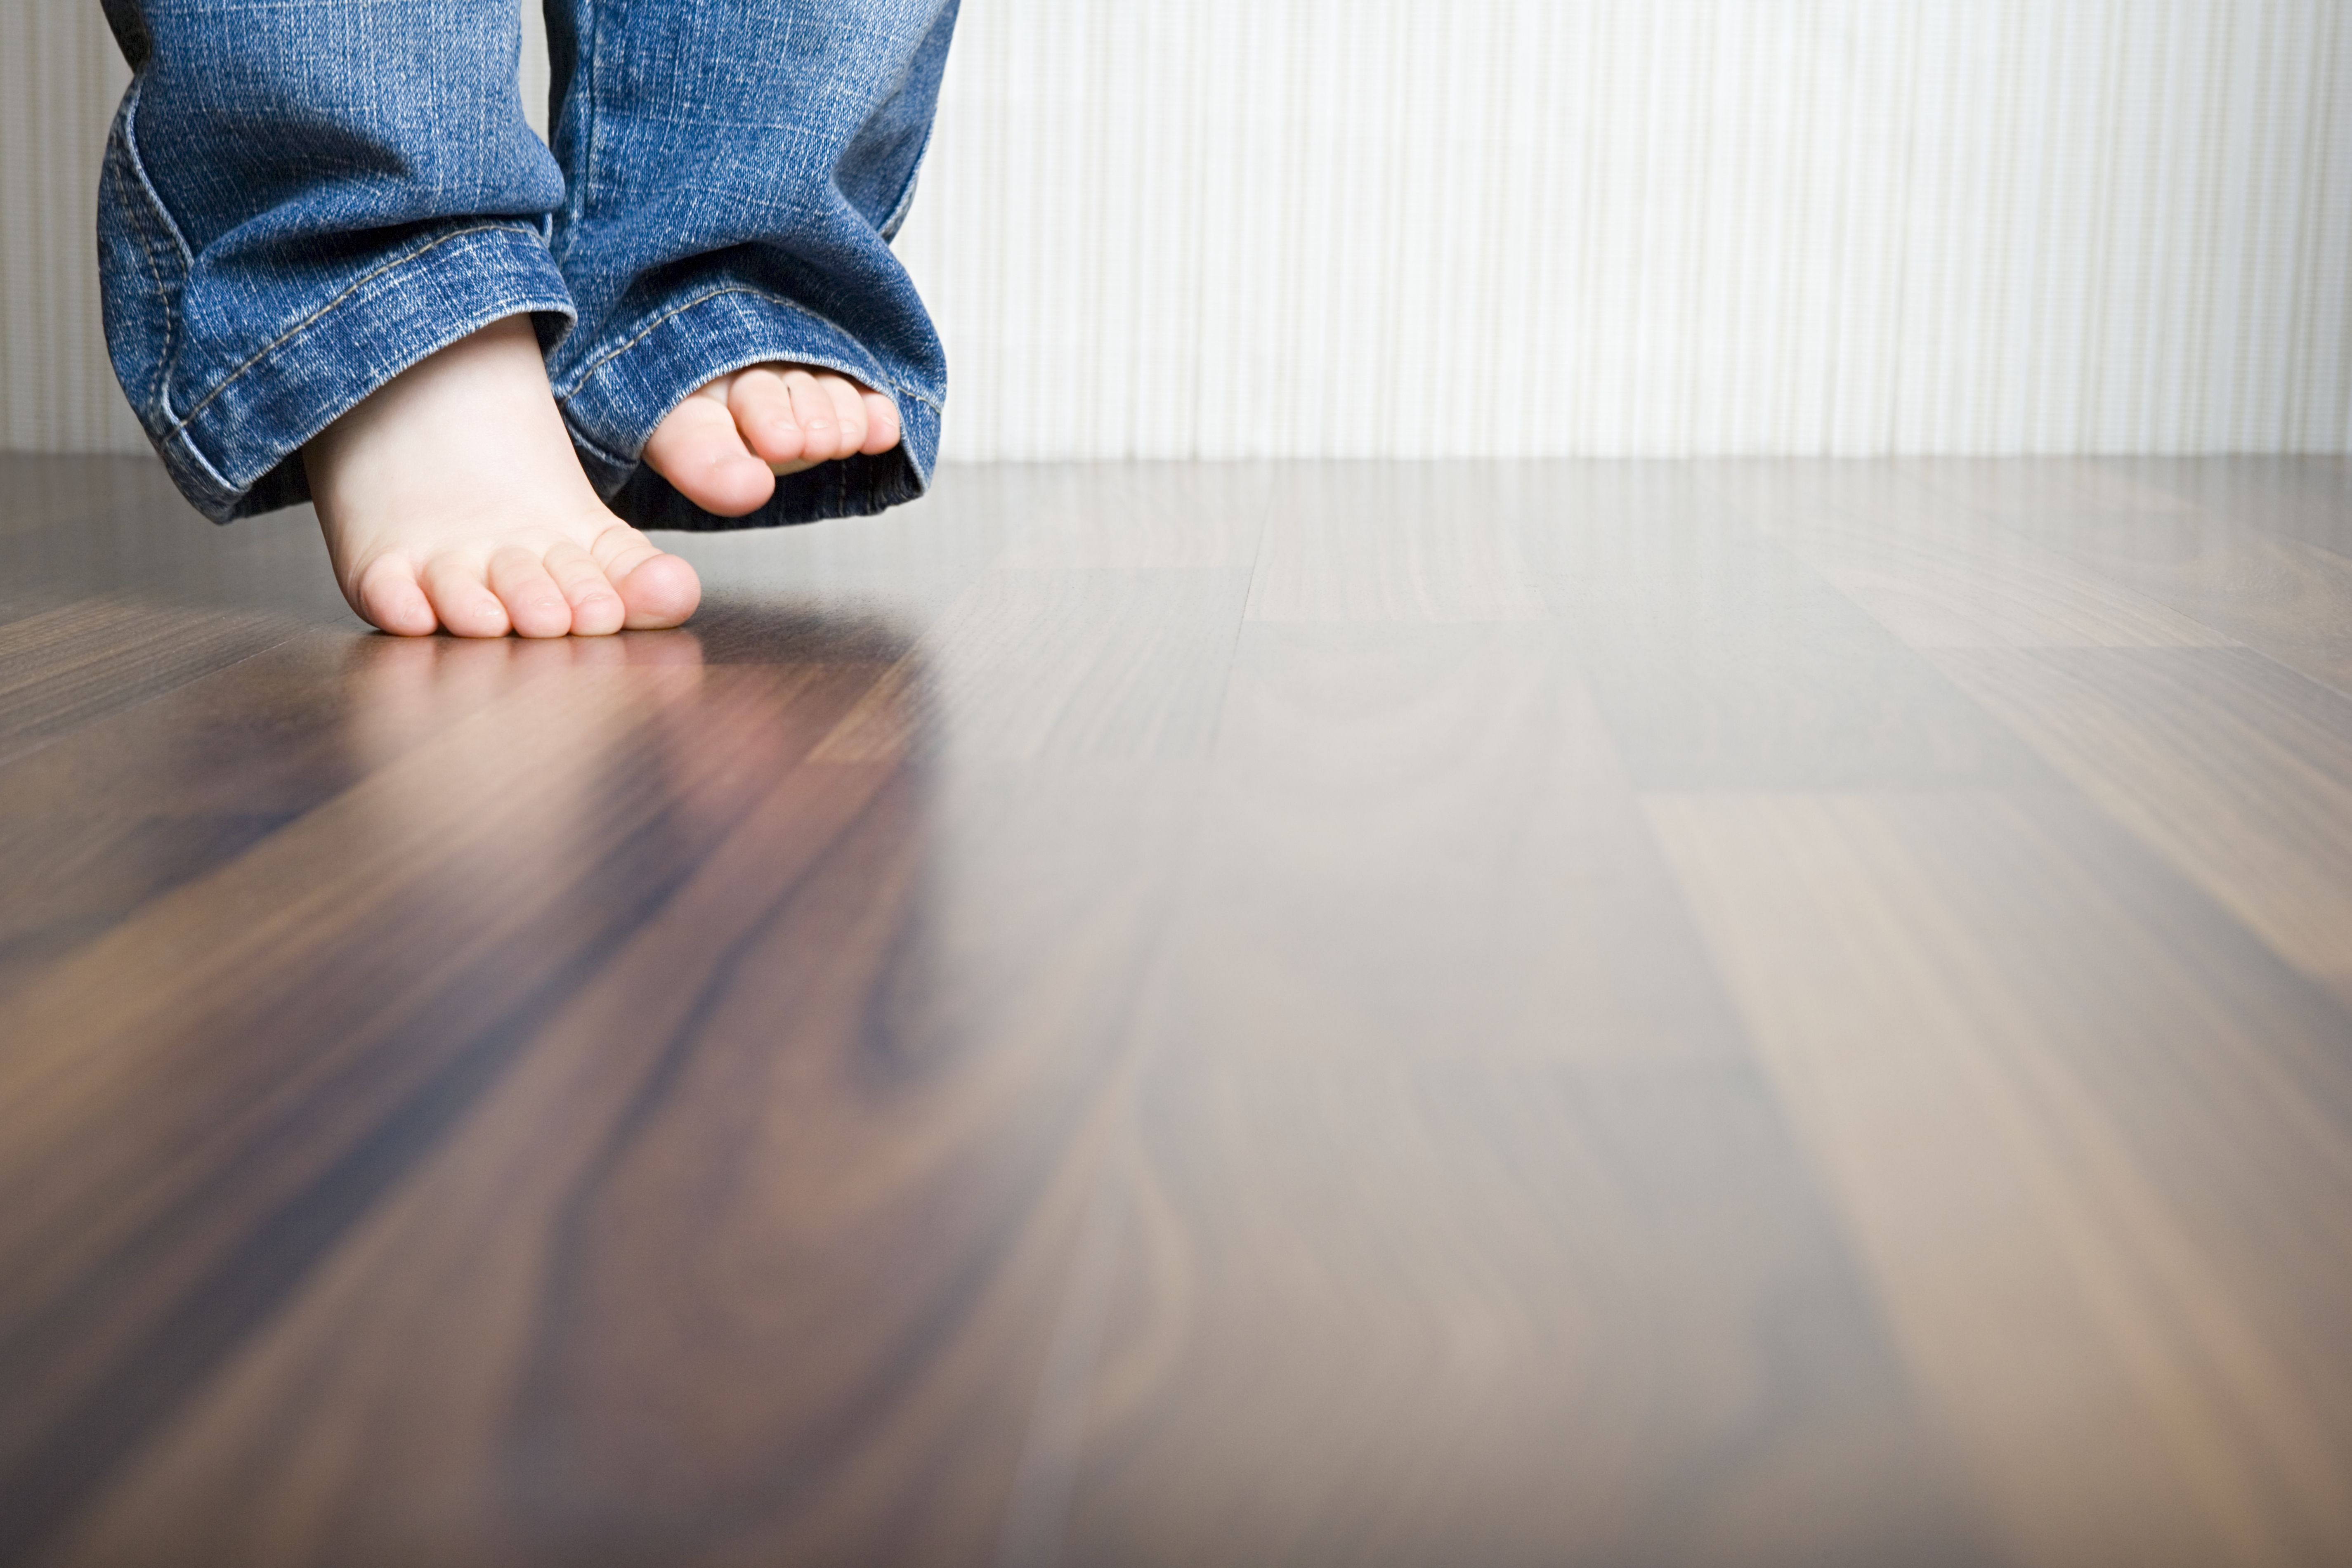 refinished hardwood floors drying time of how to clean hardwood floors best way to clean wood flooring with 1512149908 gettyimages 75403973